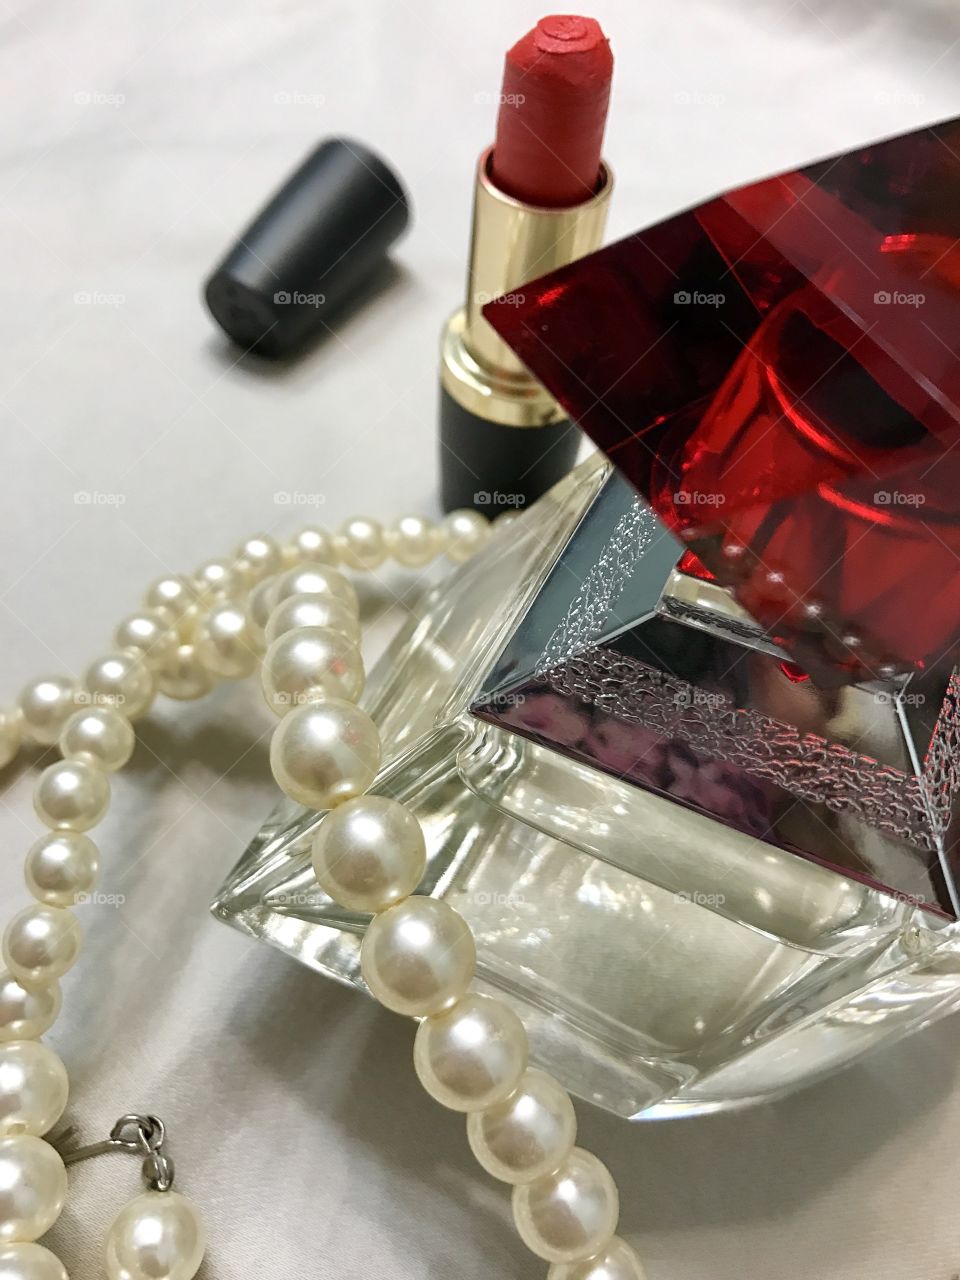 Pearls and perfume